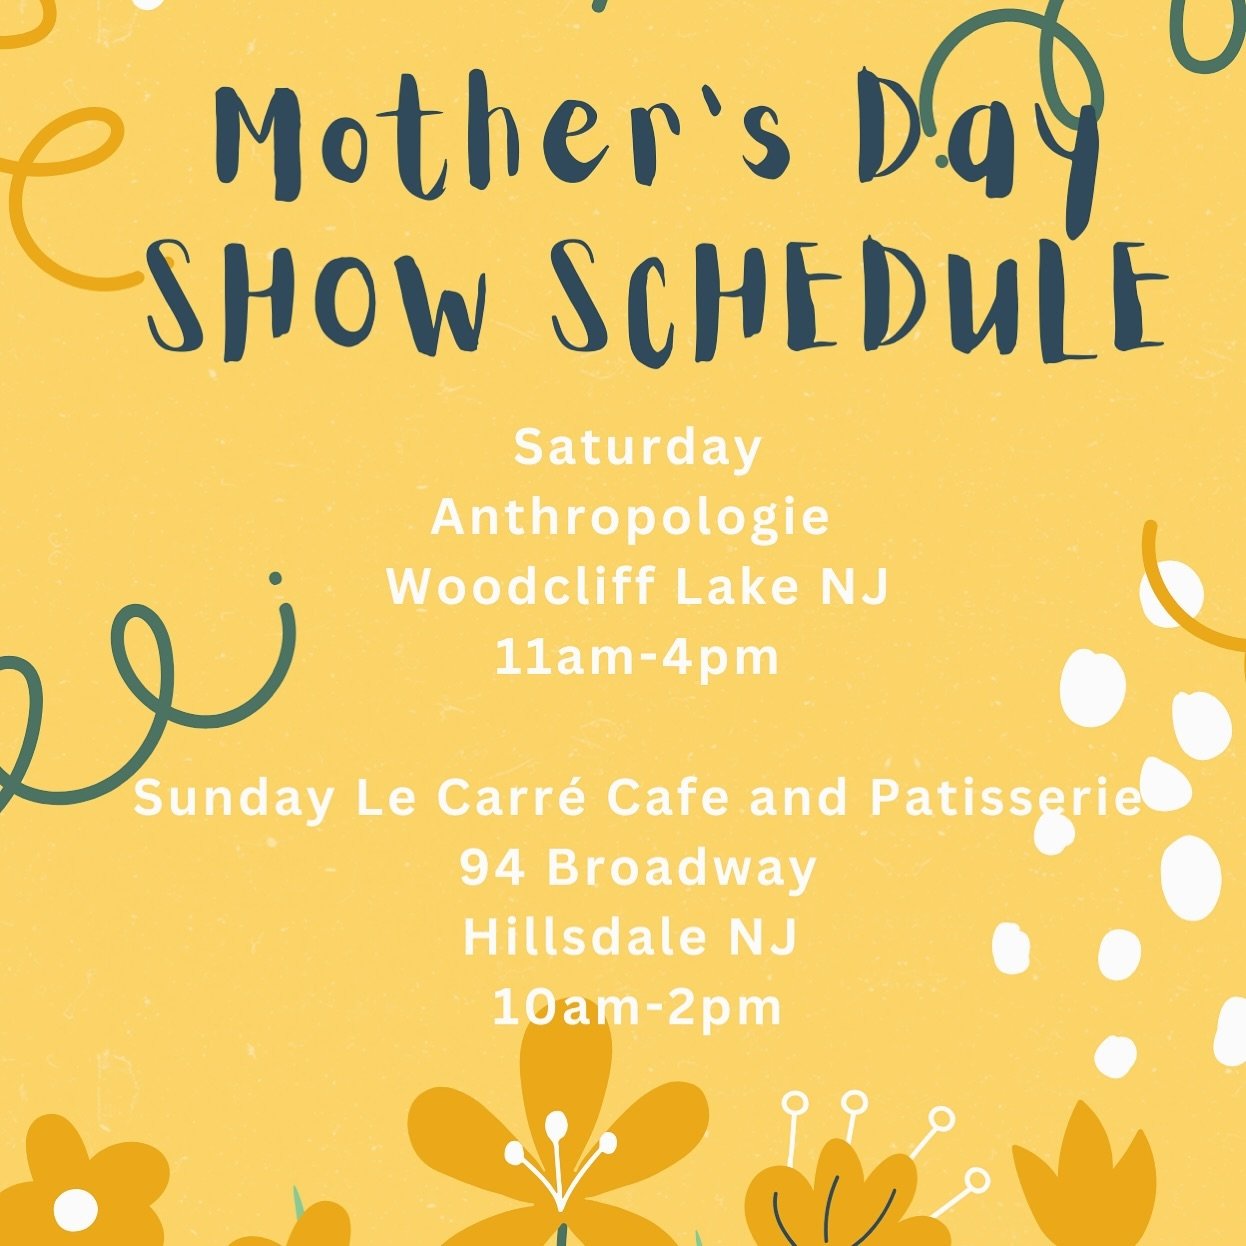 This week!

Just added: Monday, The 76 House in Tappan, NY from 6-10pm.

Saturday at Anthropologie Woodcliff Lake, NJ 11am-4pm

Sunday at Le Carre Cafe and Patisserie, Hillsdale NJ 10am-2pm